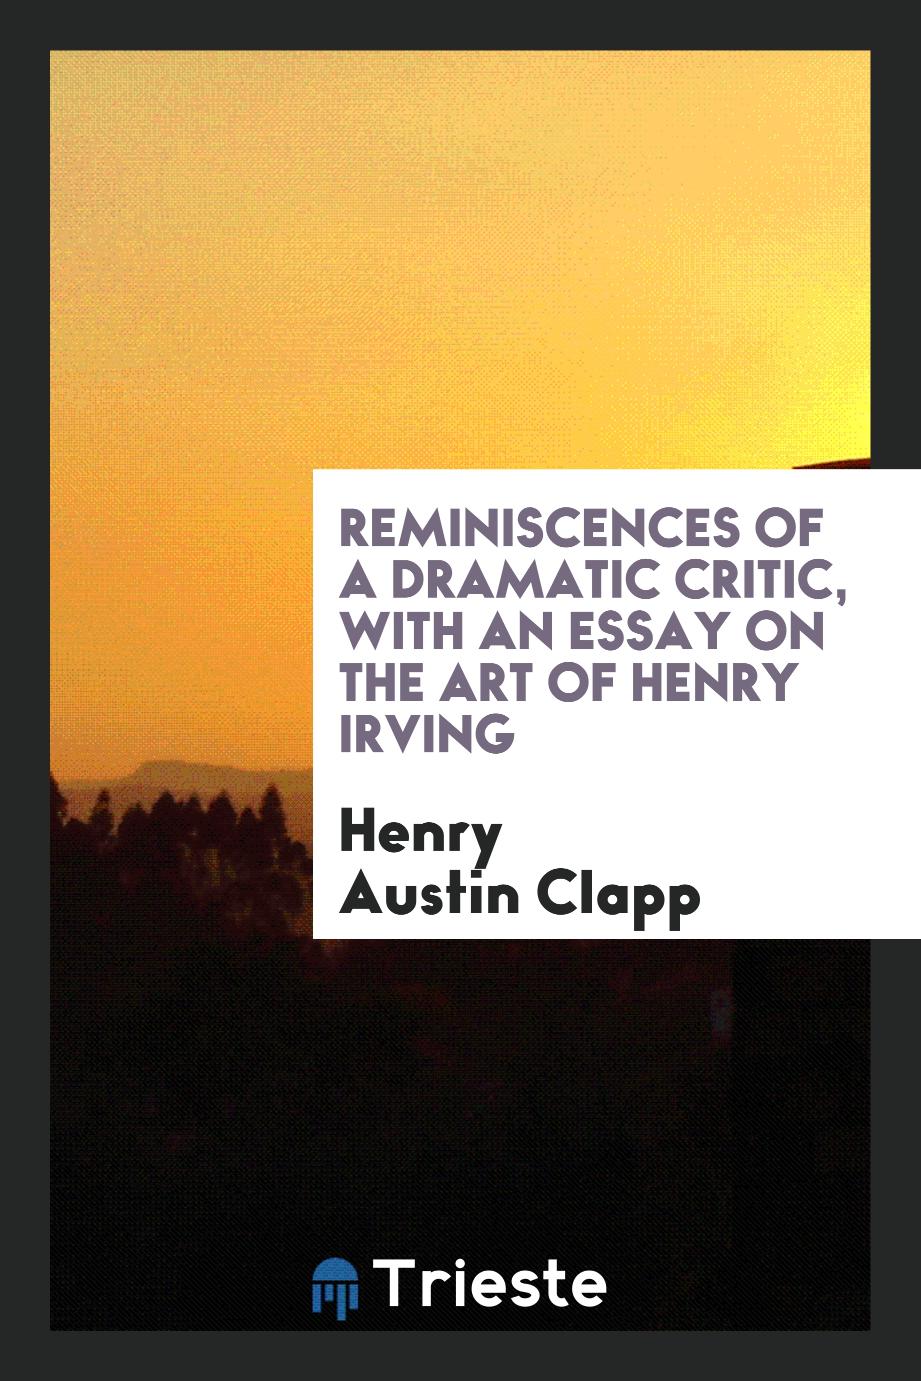 Reminiscences of a dramatic critic, with an essay on the art of Henry Irving